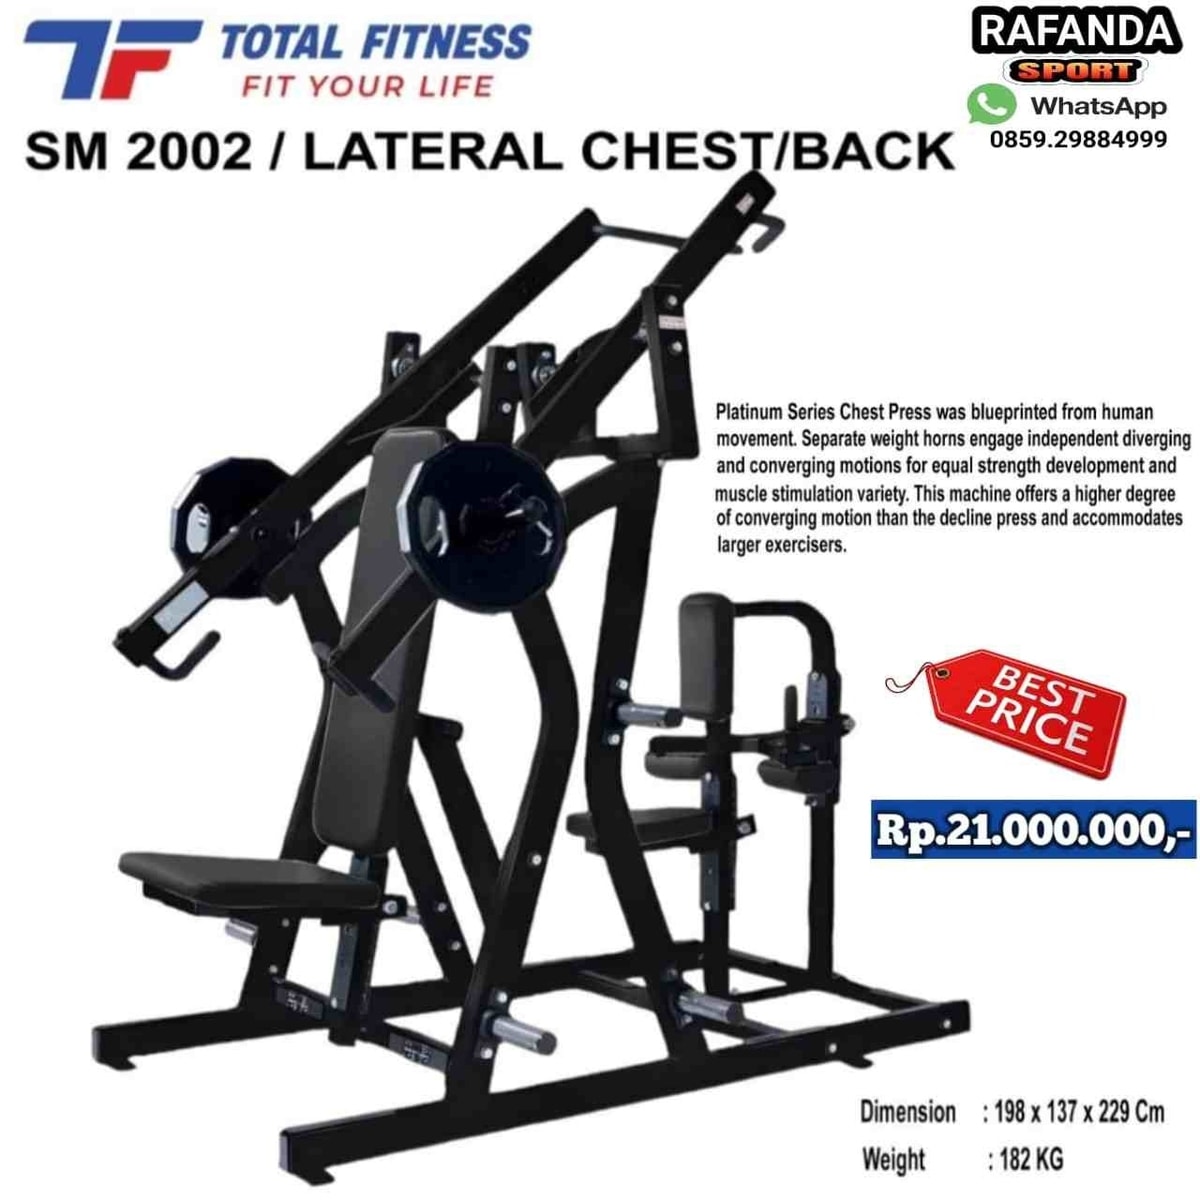 Lateral Chest/Back SM2002